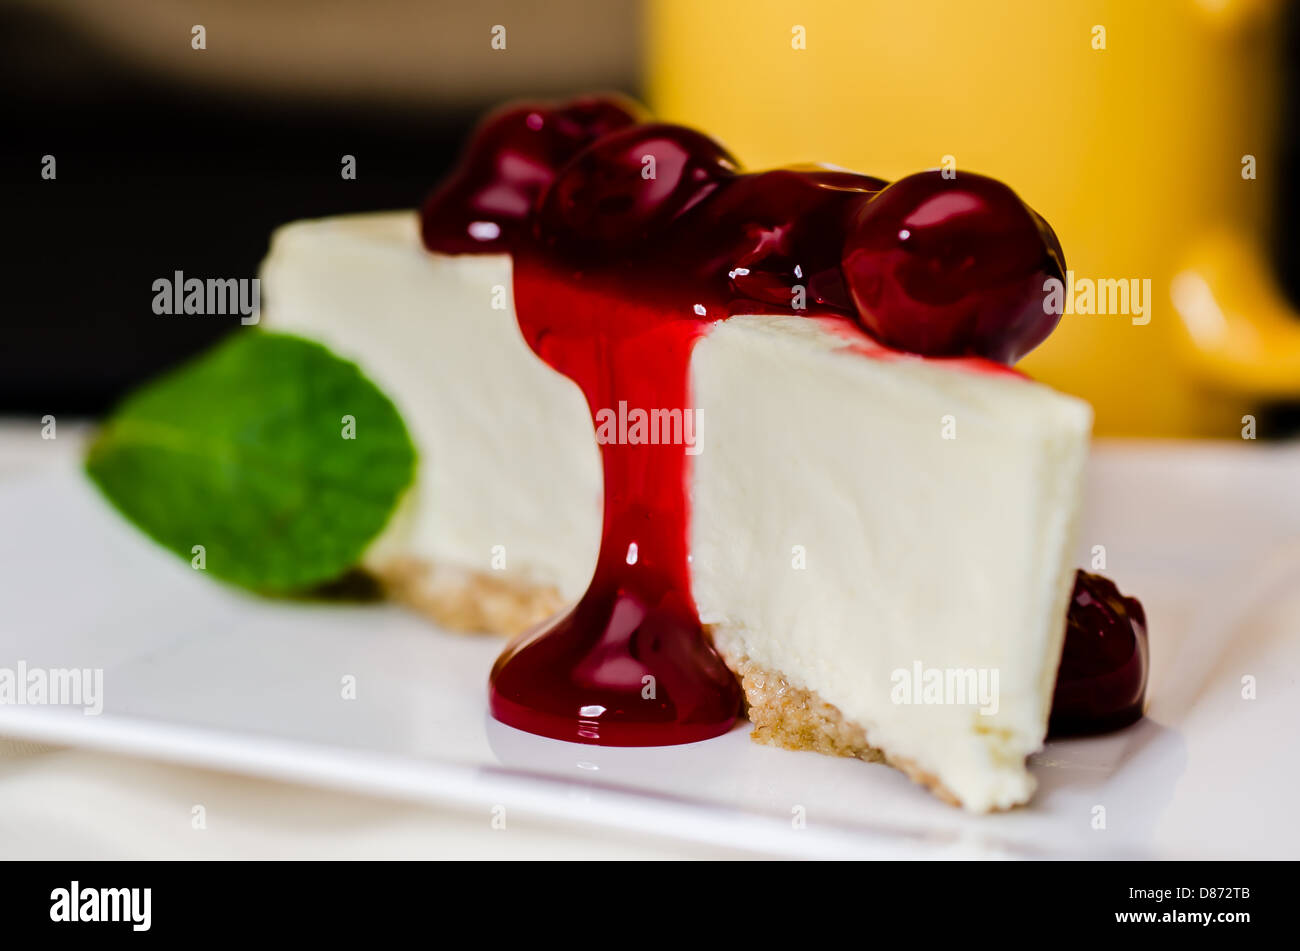 Slice of cherry cheesecake and coffee with mint garnish. Shallow depth of field. Stock Photo